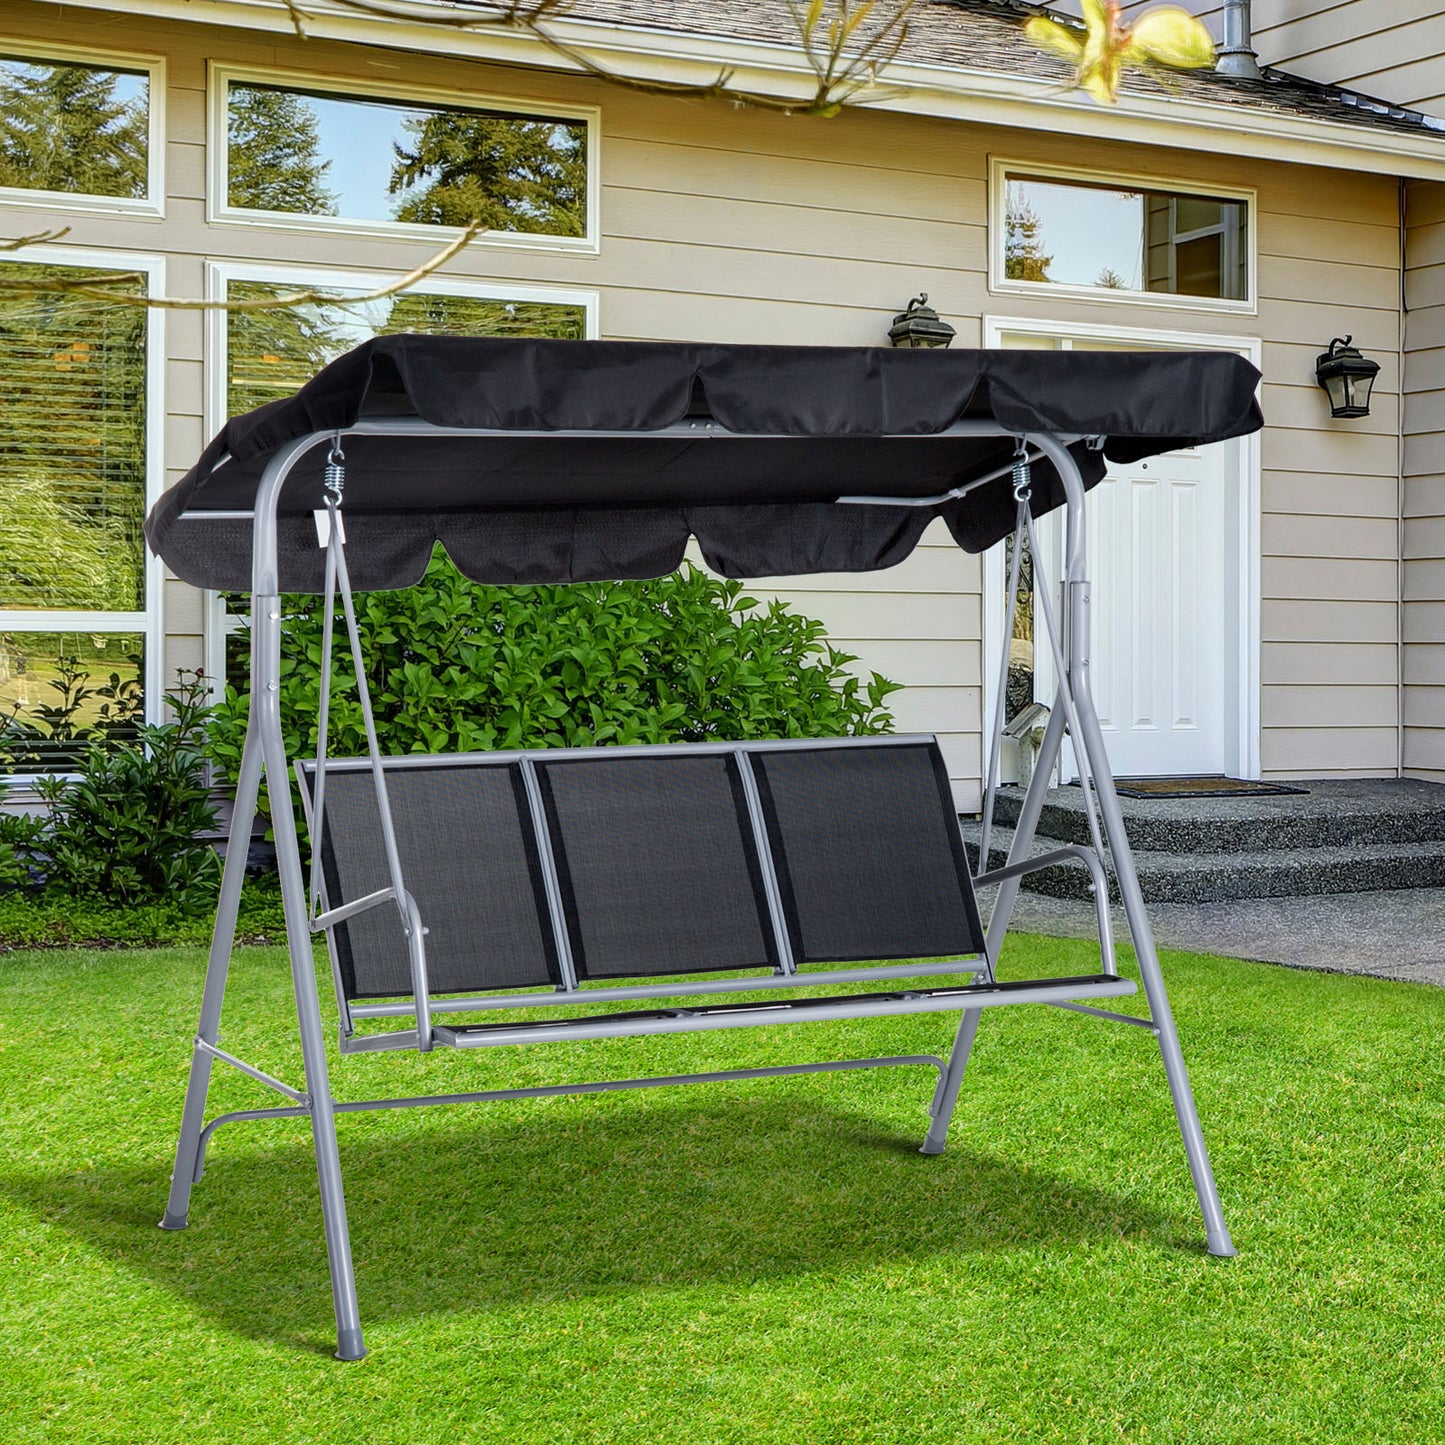 Outsunny Patio Swing Chair 3-Seater Garden Hammock Bench with Rocking Shelter Shade, Metal Frame, Black